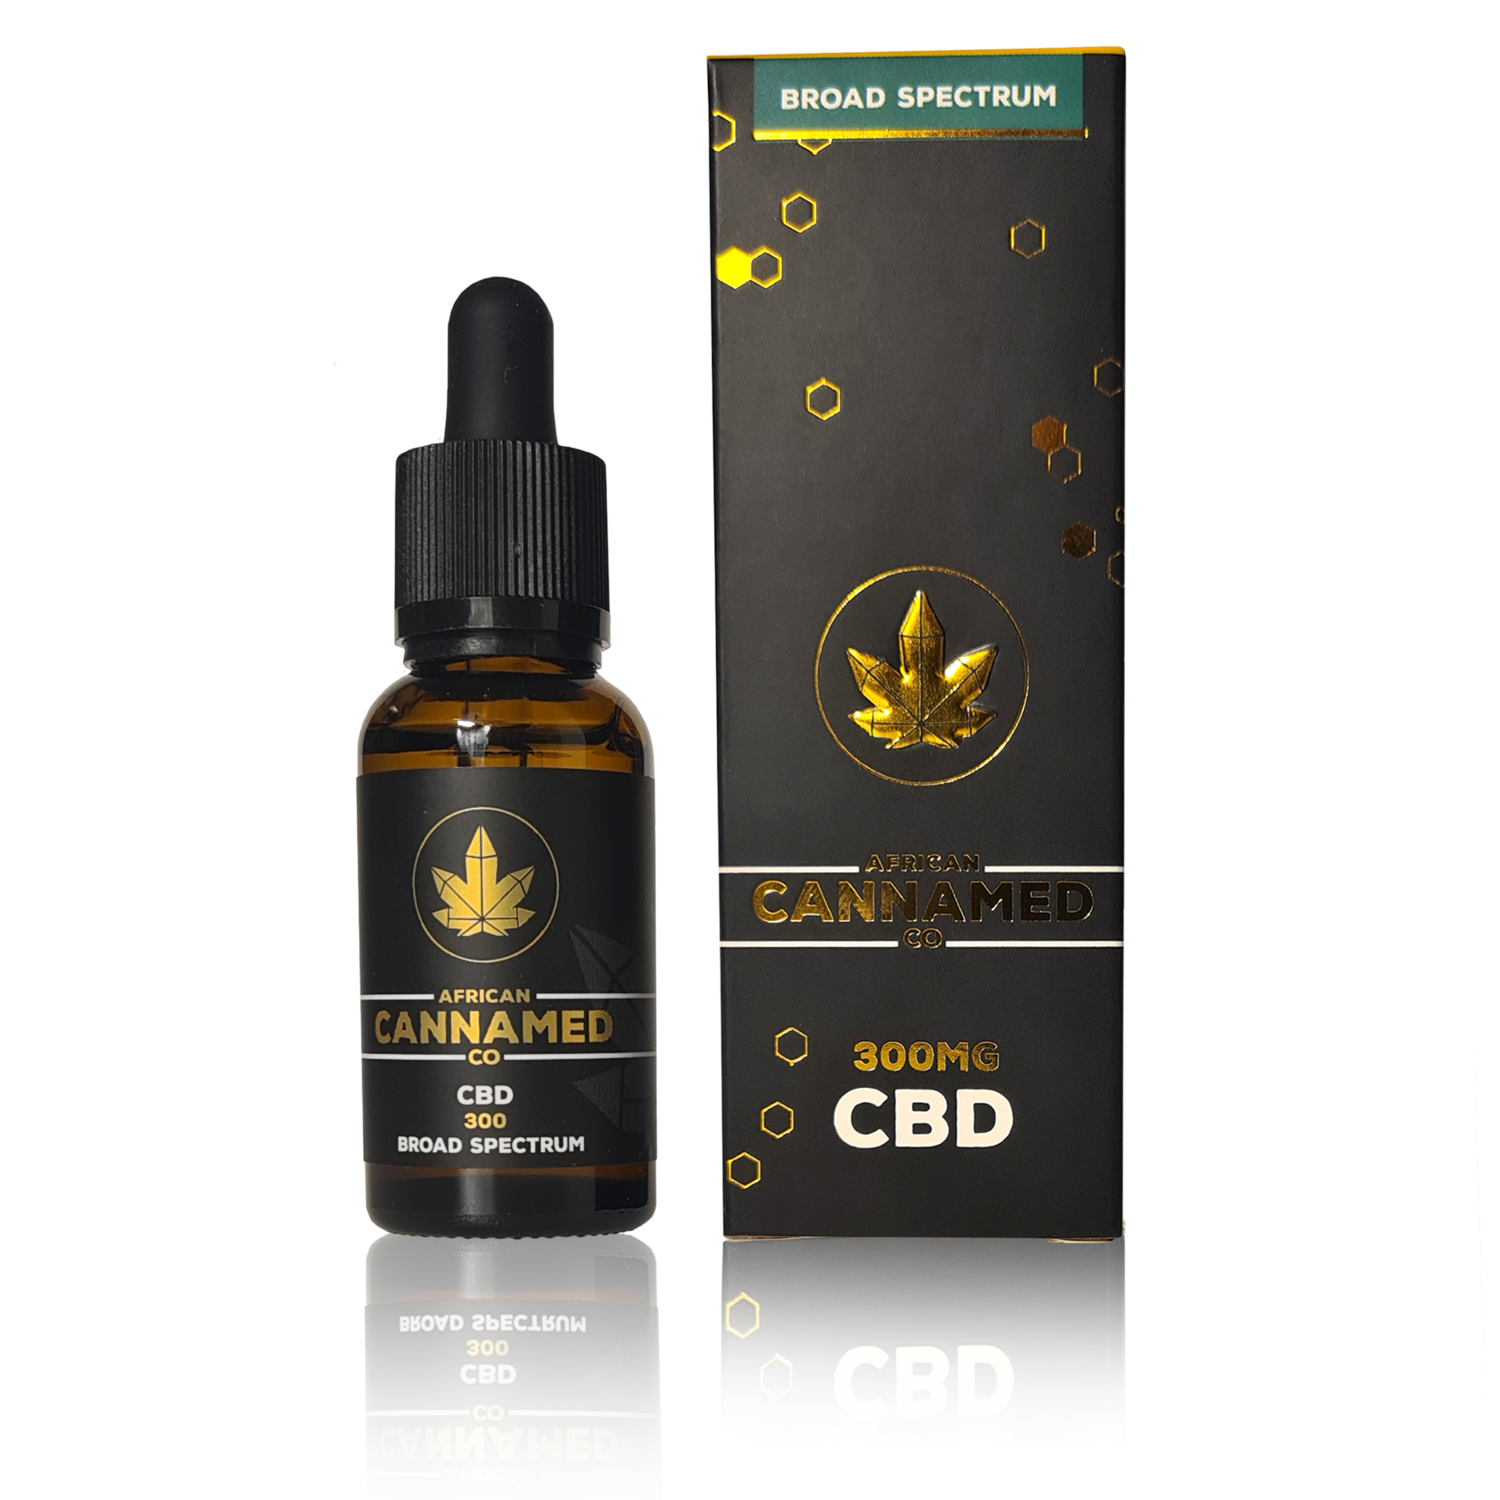 This oil was created for clients looking for a CBD oil without the THC but with all the benefits of Cannabis/hemp included. This is a Broad Spectrum Oil and NOT AN ISOLATE.